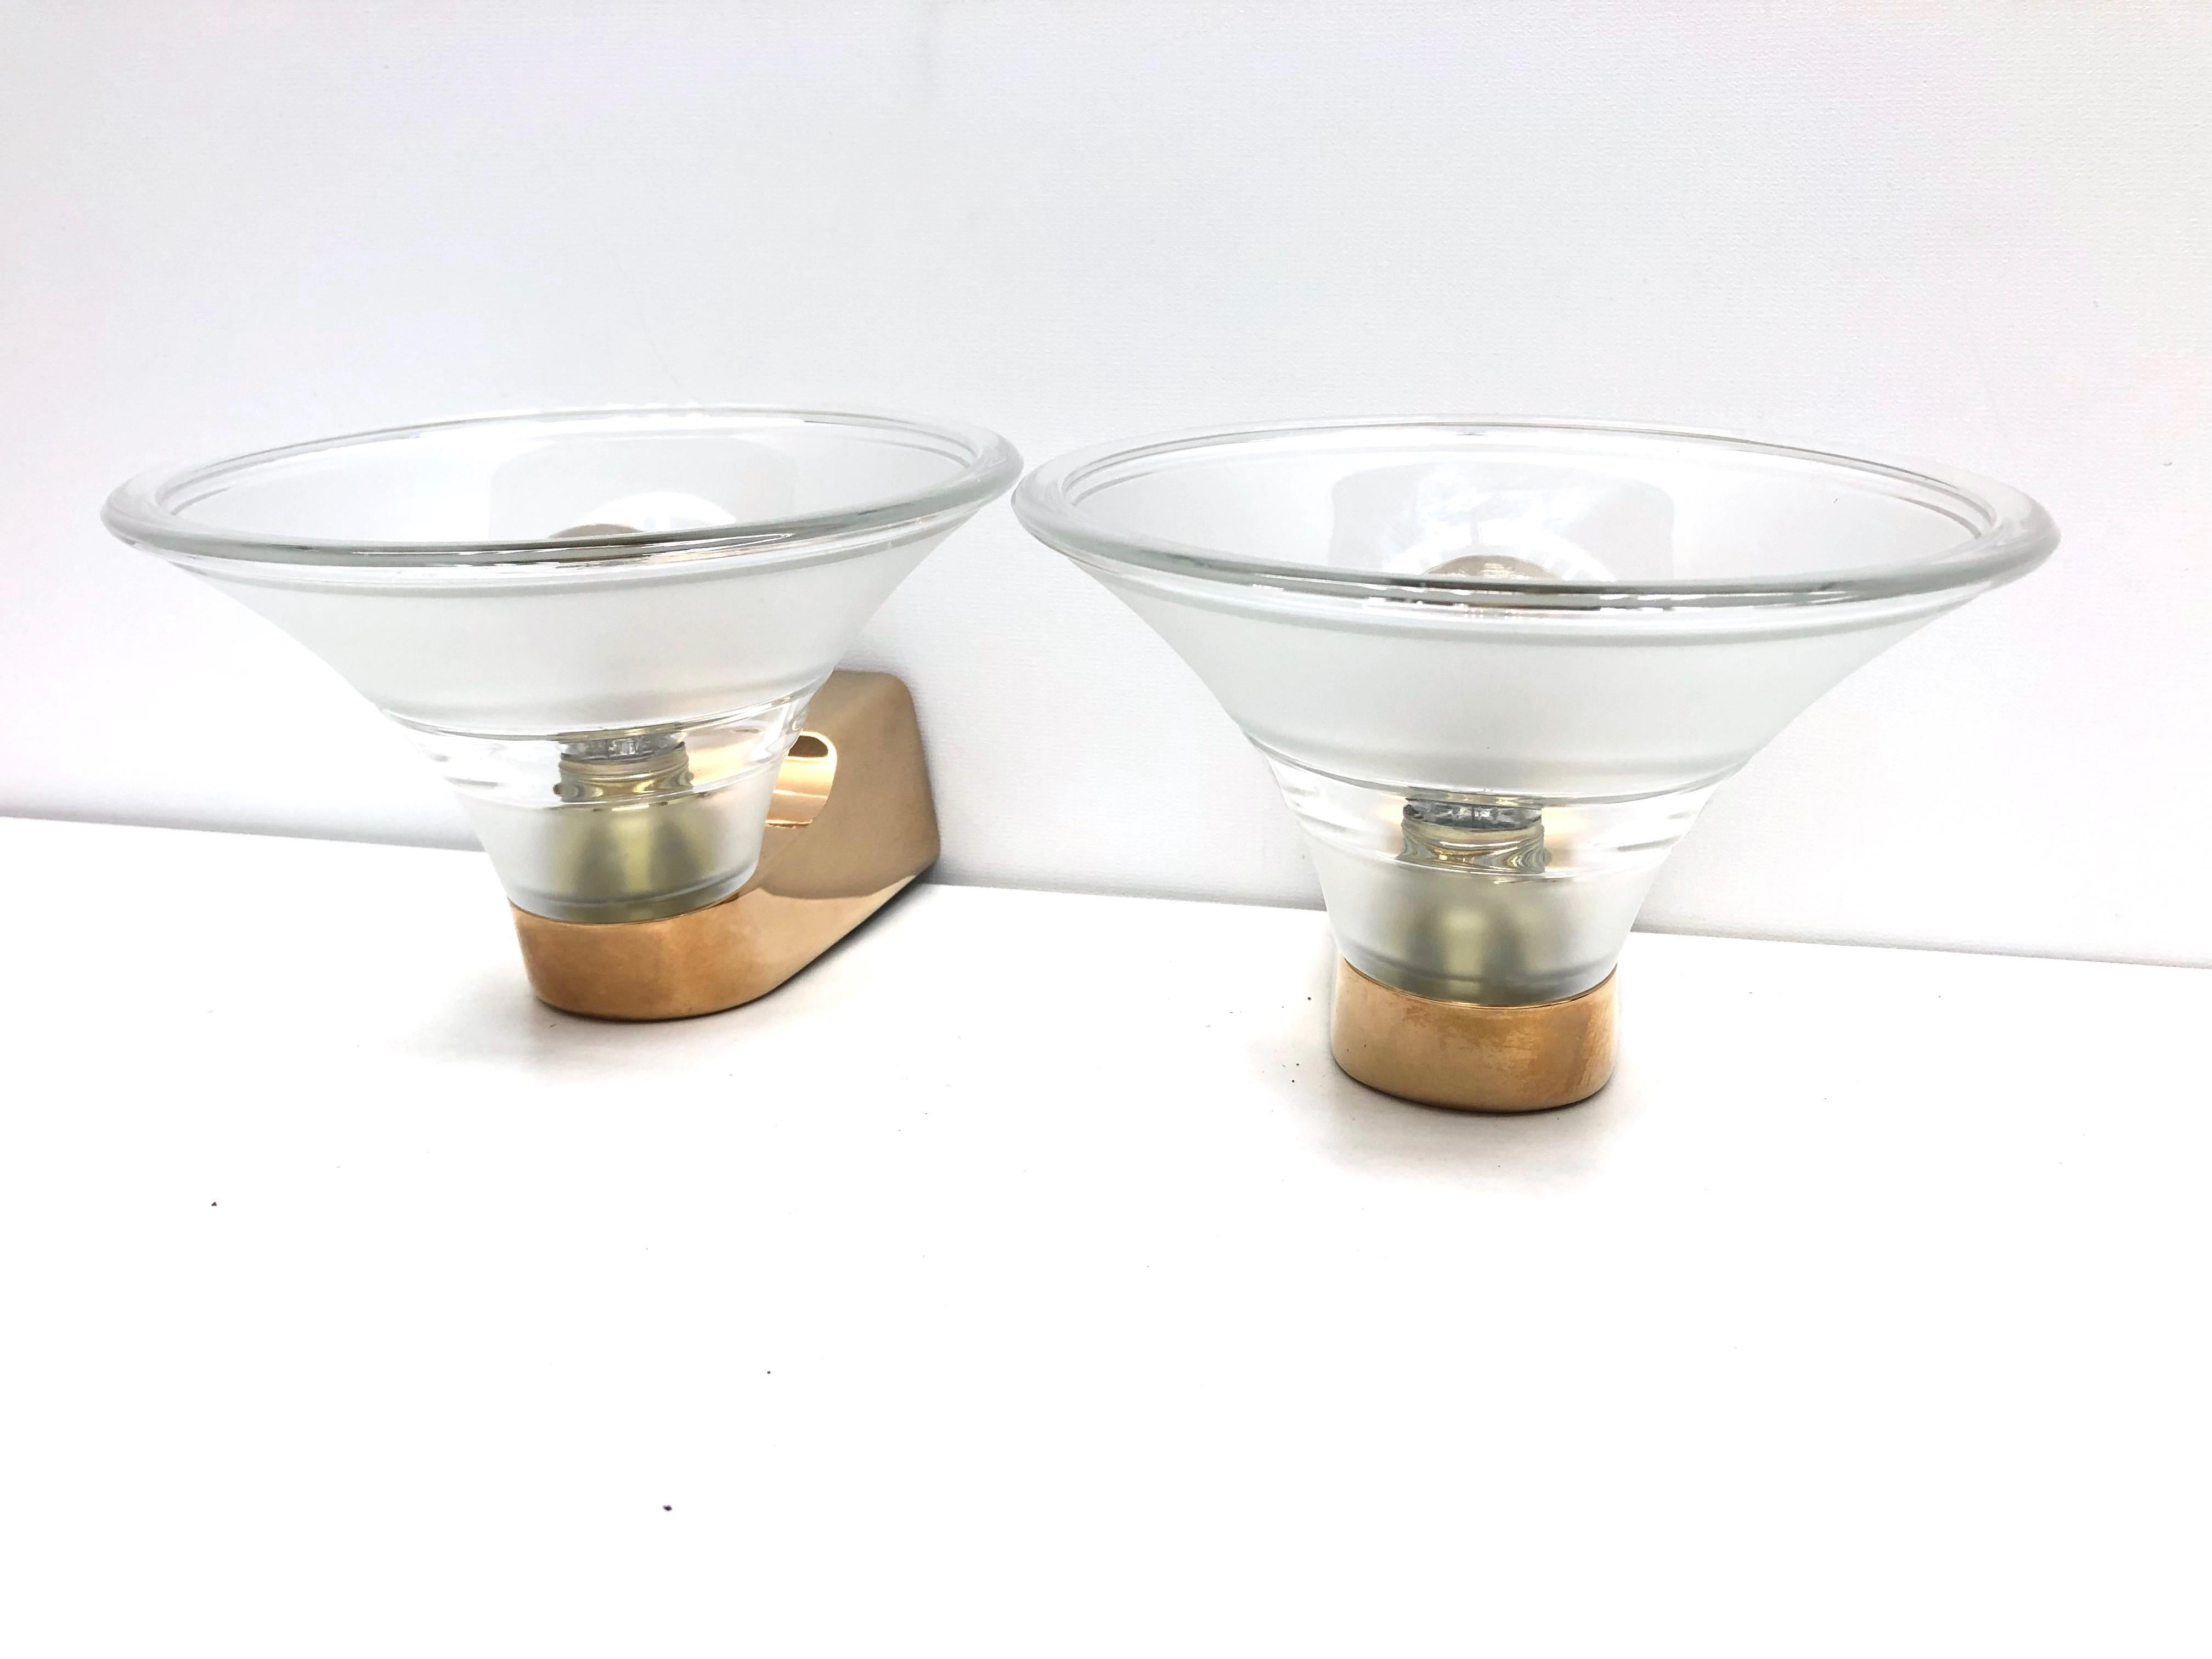 Pair of Art Deco style sconces. Beautiful clear glass on gold plated frames. Each fixture requires one European E14 / 110 Volt Candelabra bulb, each bulb up to 40 watts.